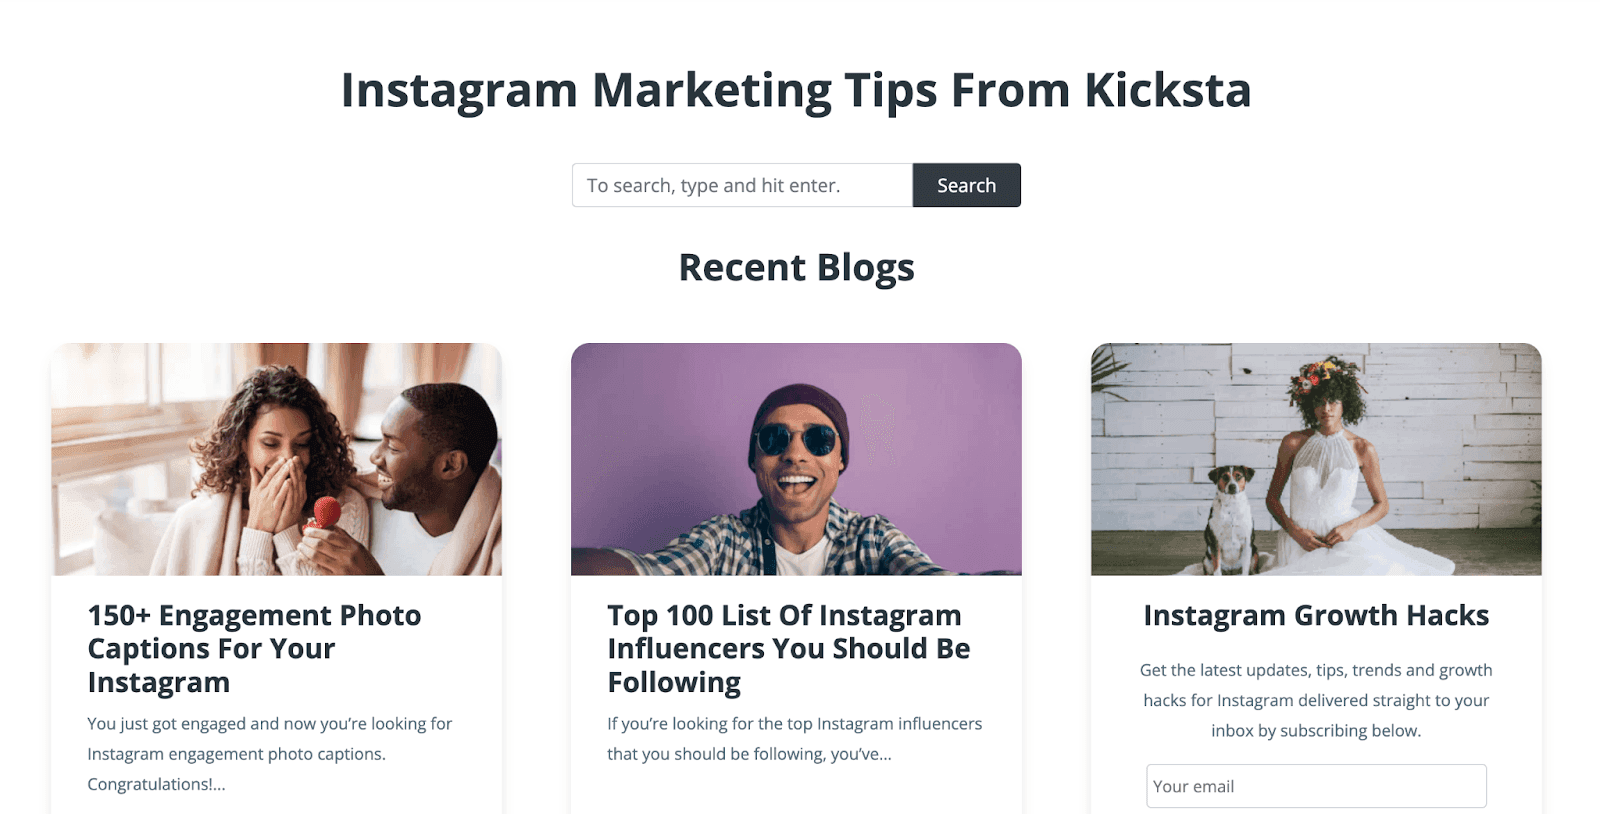 Learn about about instagram marketing ideas from Kicksta